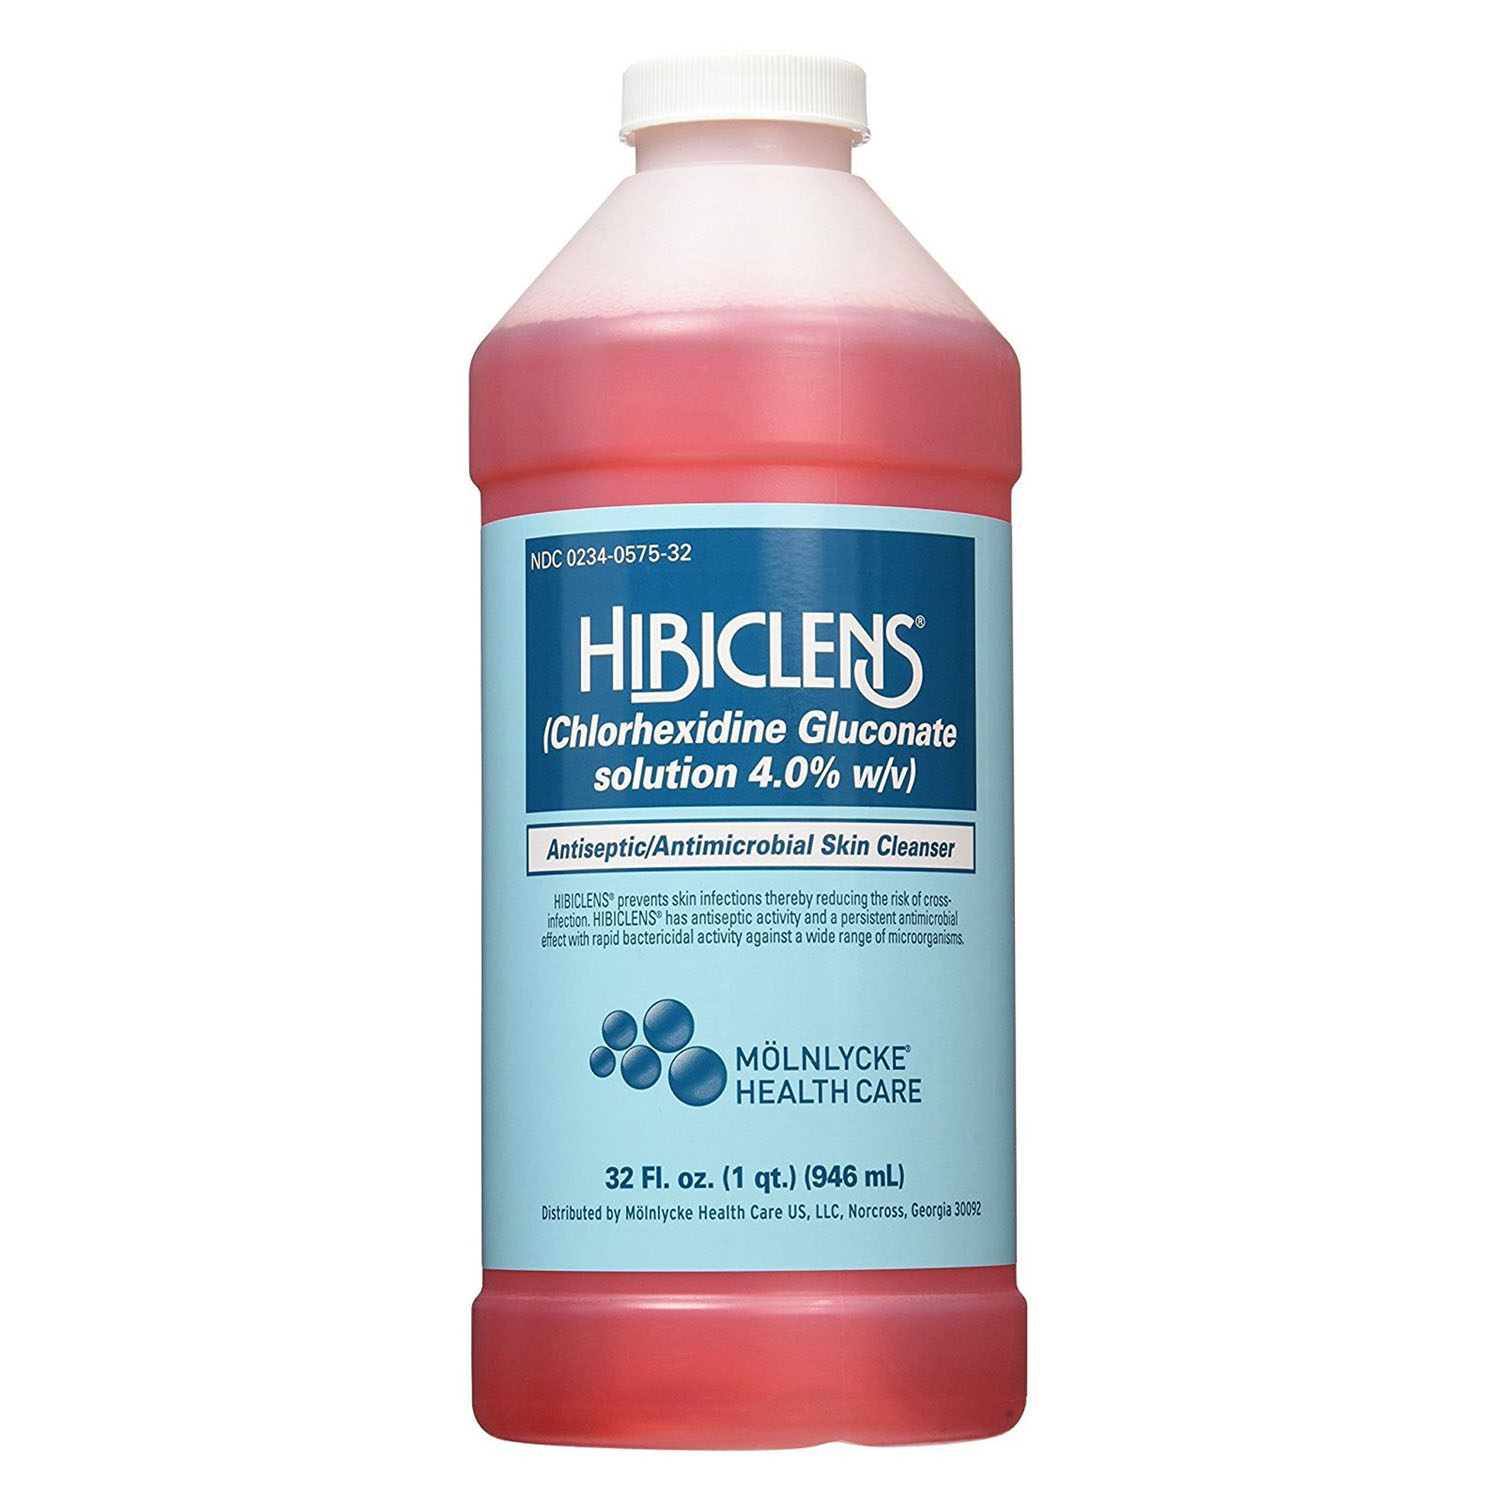 MOLNLYCKE HIBICLENS ANTISEPTIC ANTIMICROBIAL SKIN CLEANSER : 57532 EA $18.06 Stocked